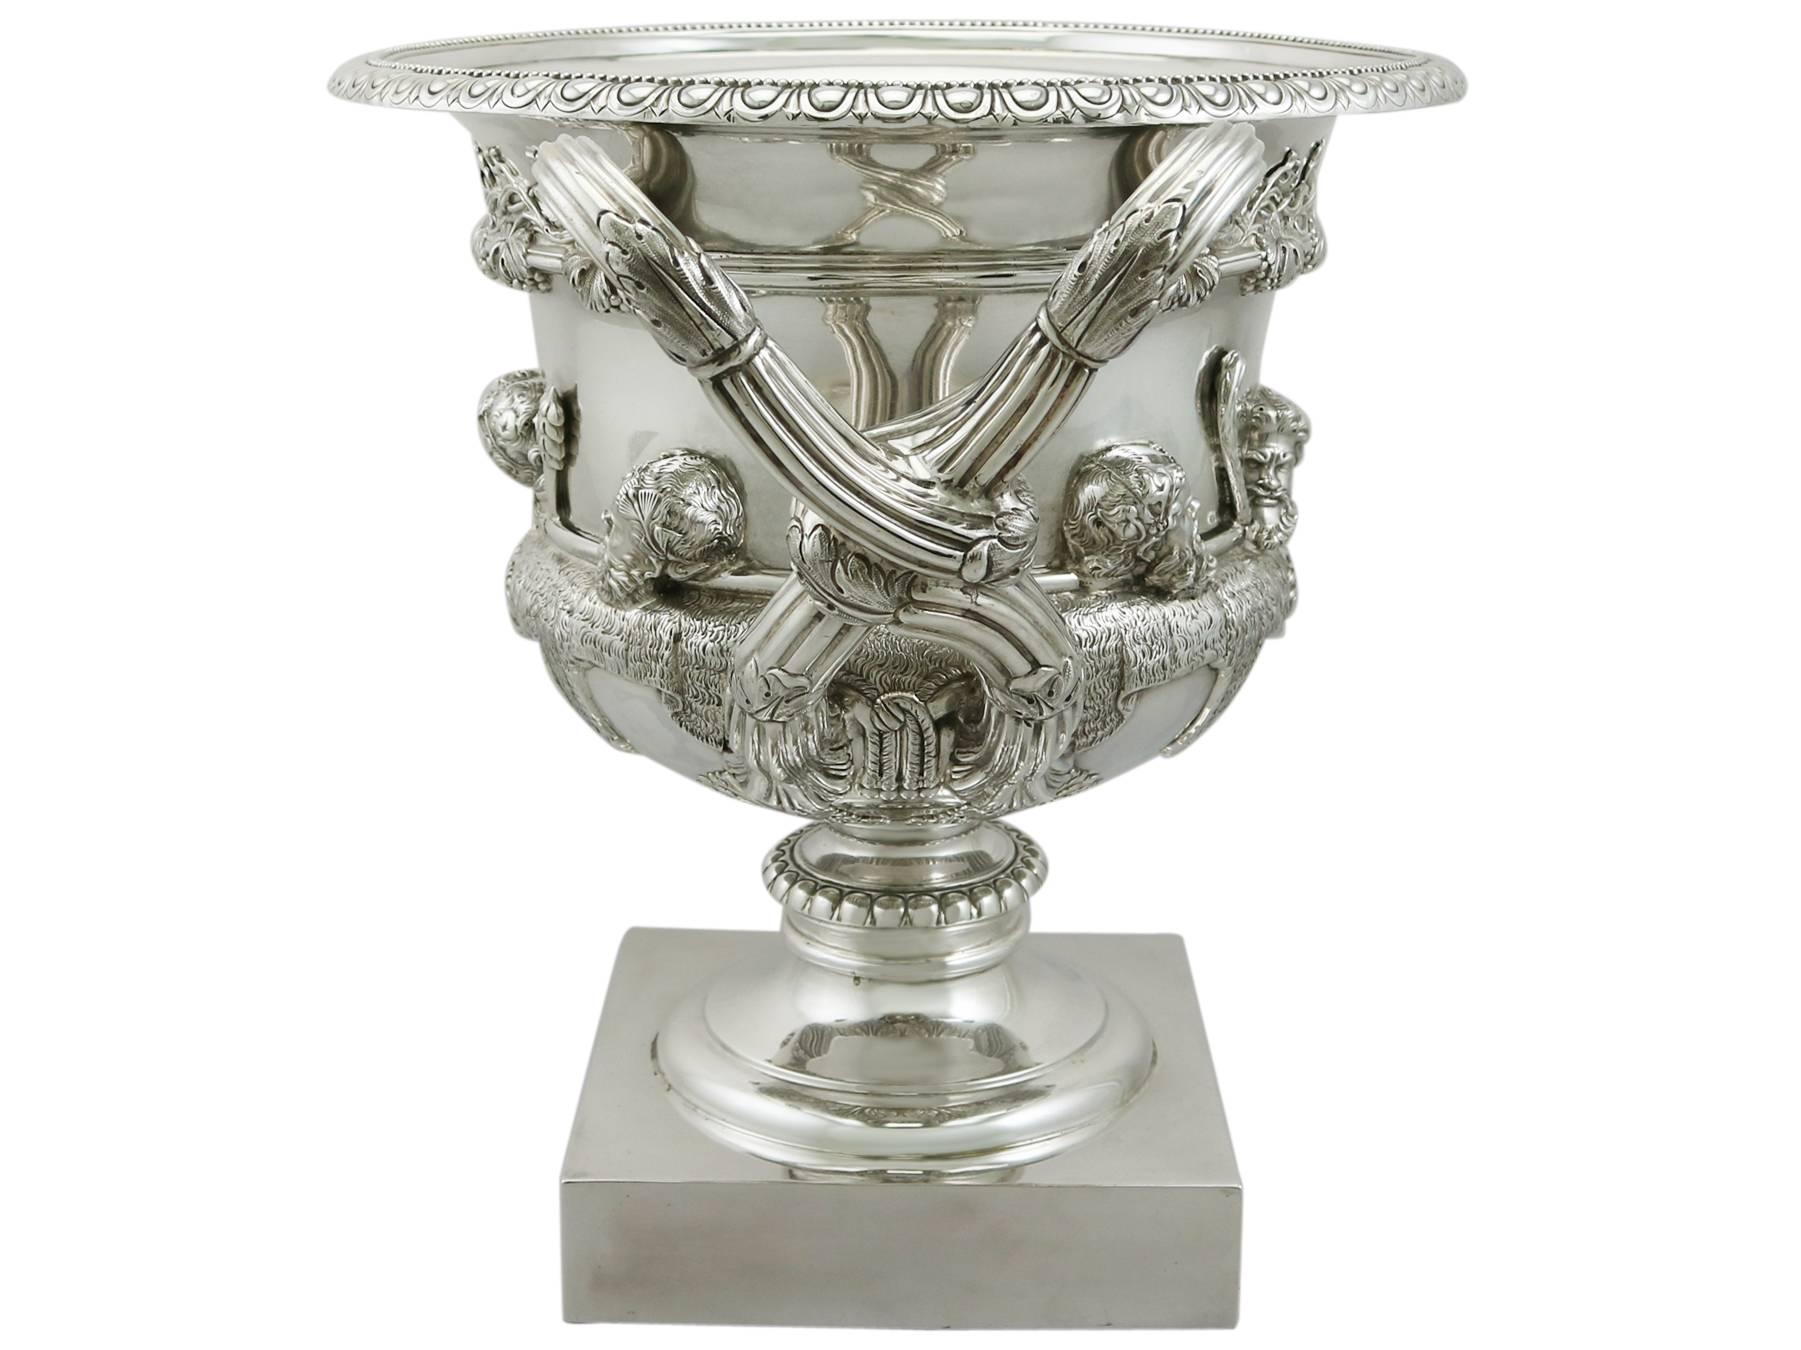 Early 20th Century Antique Edwardian 1908 Sterling Silver Warwick Vase Centerpiece